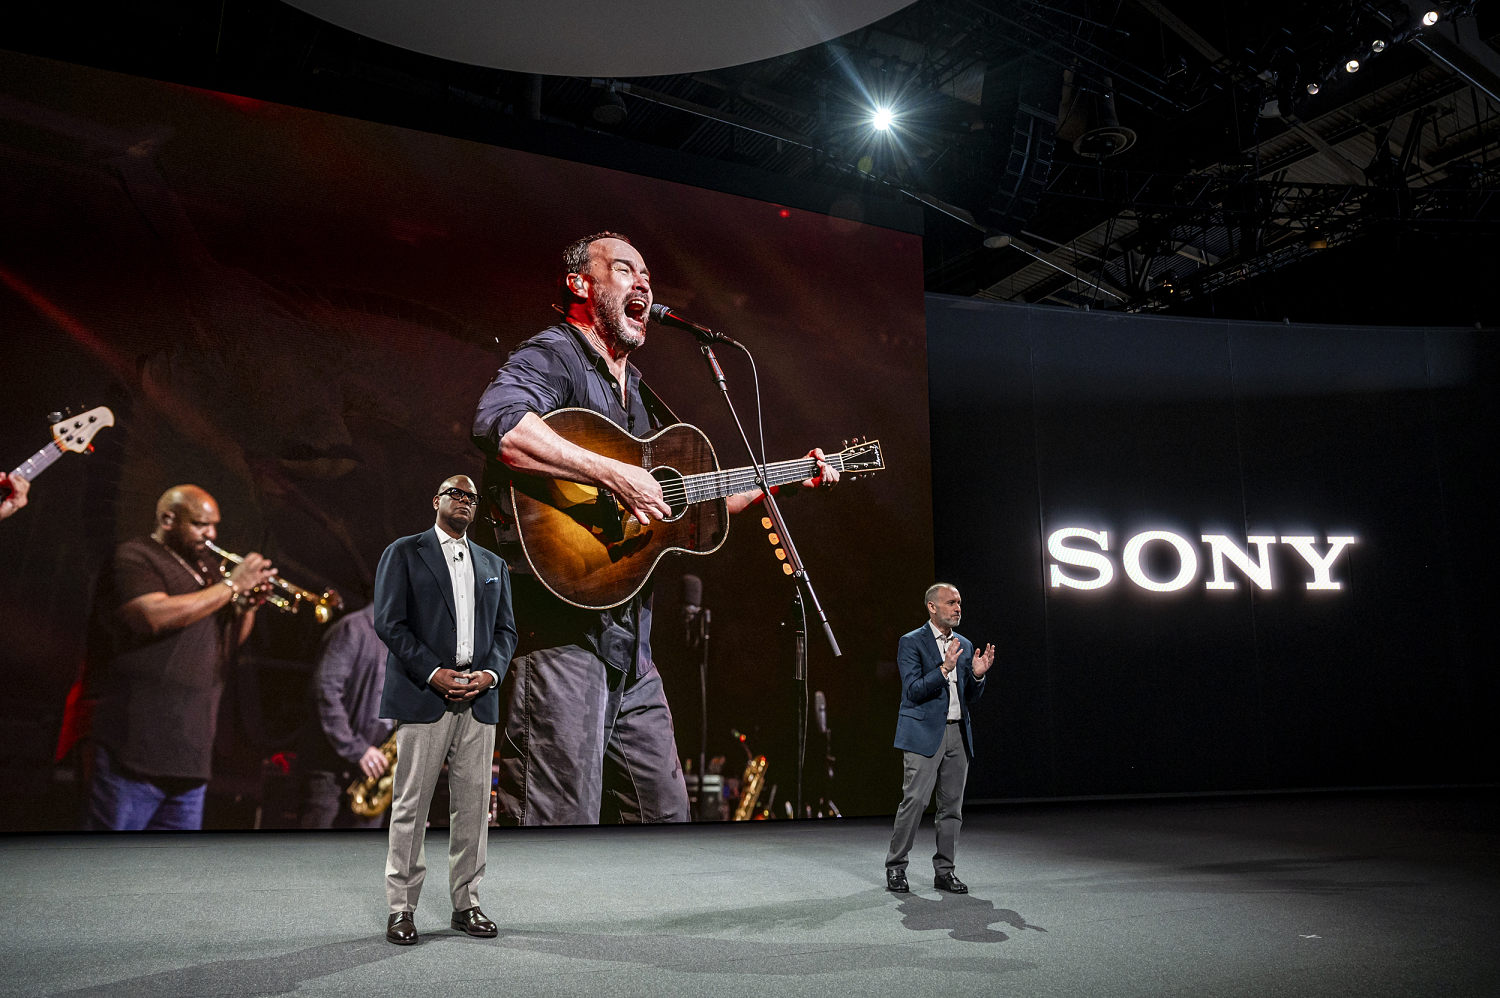 Sony Music Group warns more than 700 companies against using its content to train AI